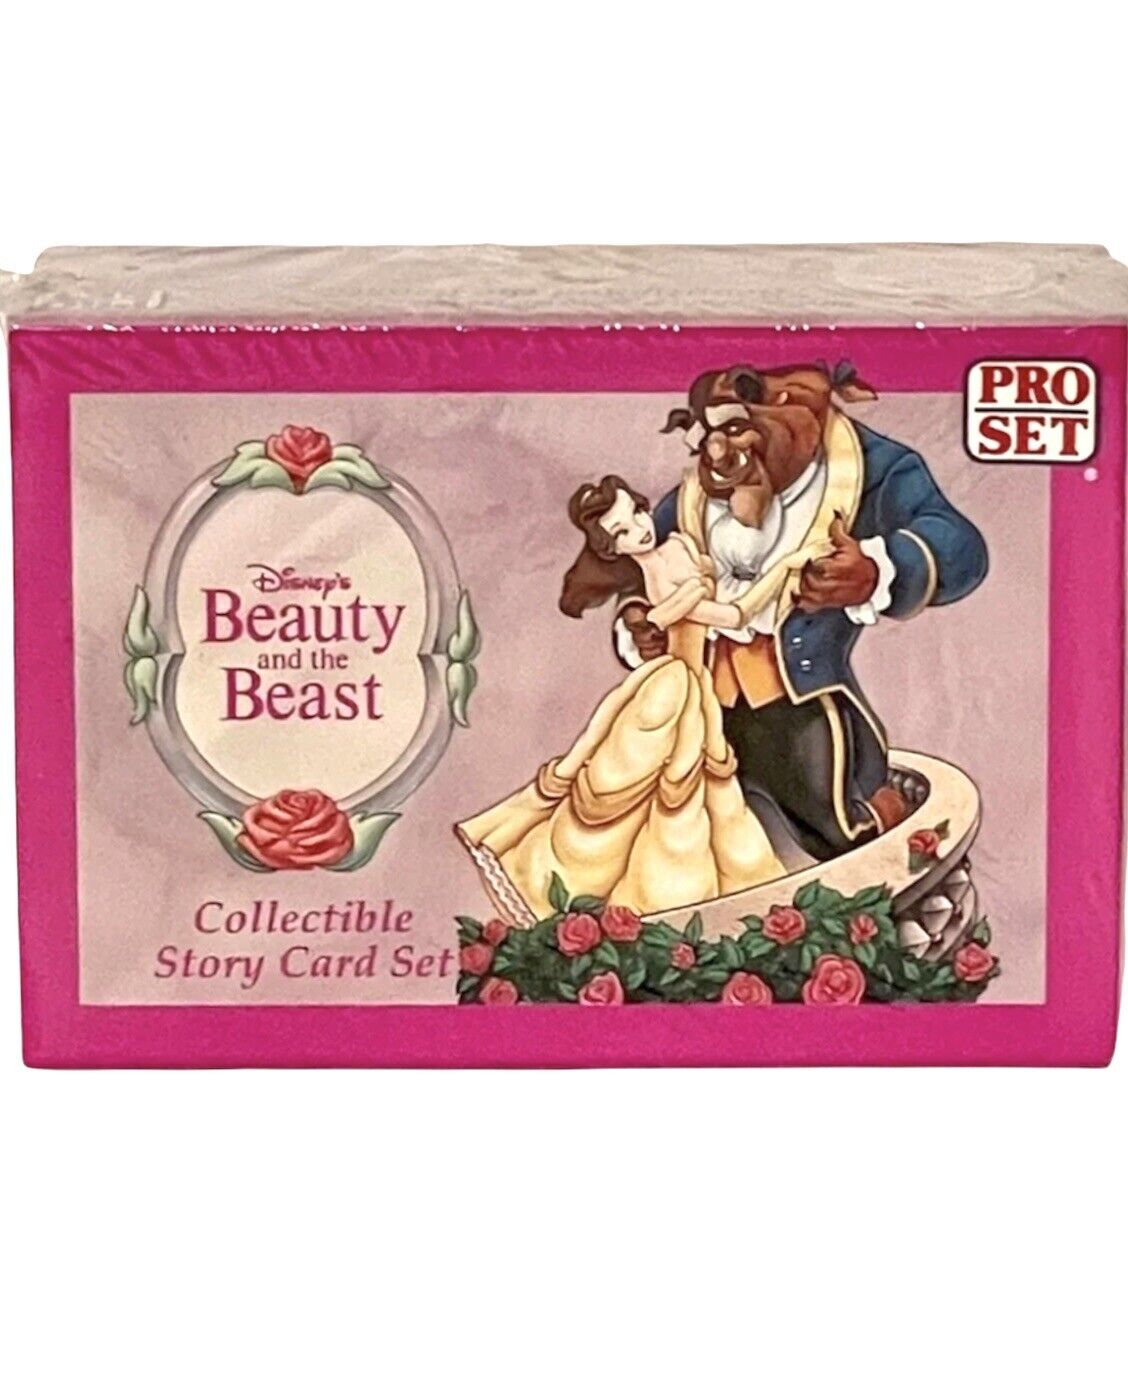 Beauty and the Beast 1992 PROSET Collectible Storycard Set